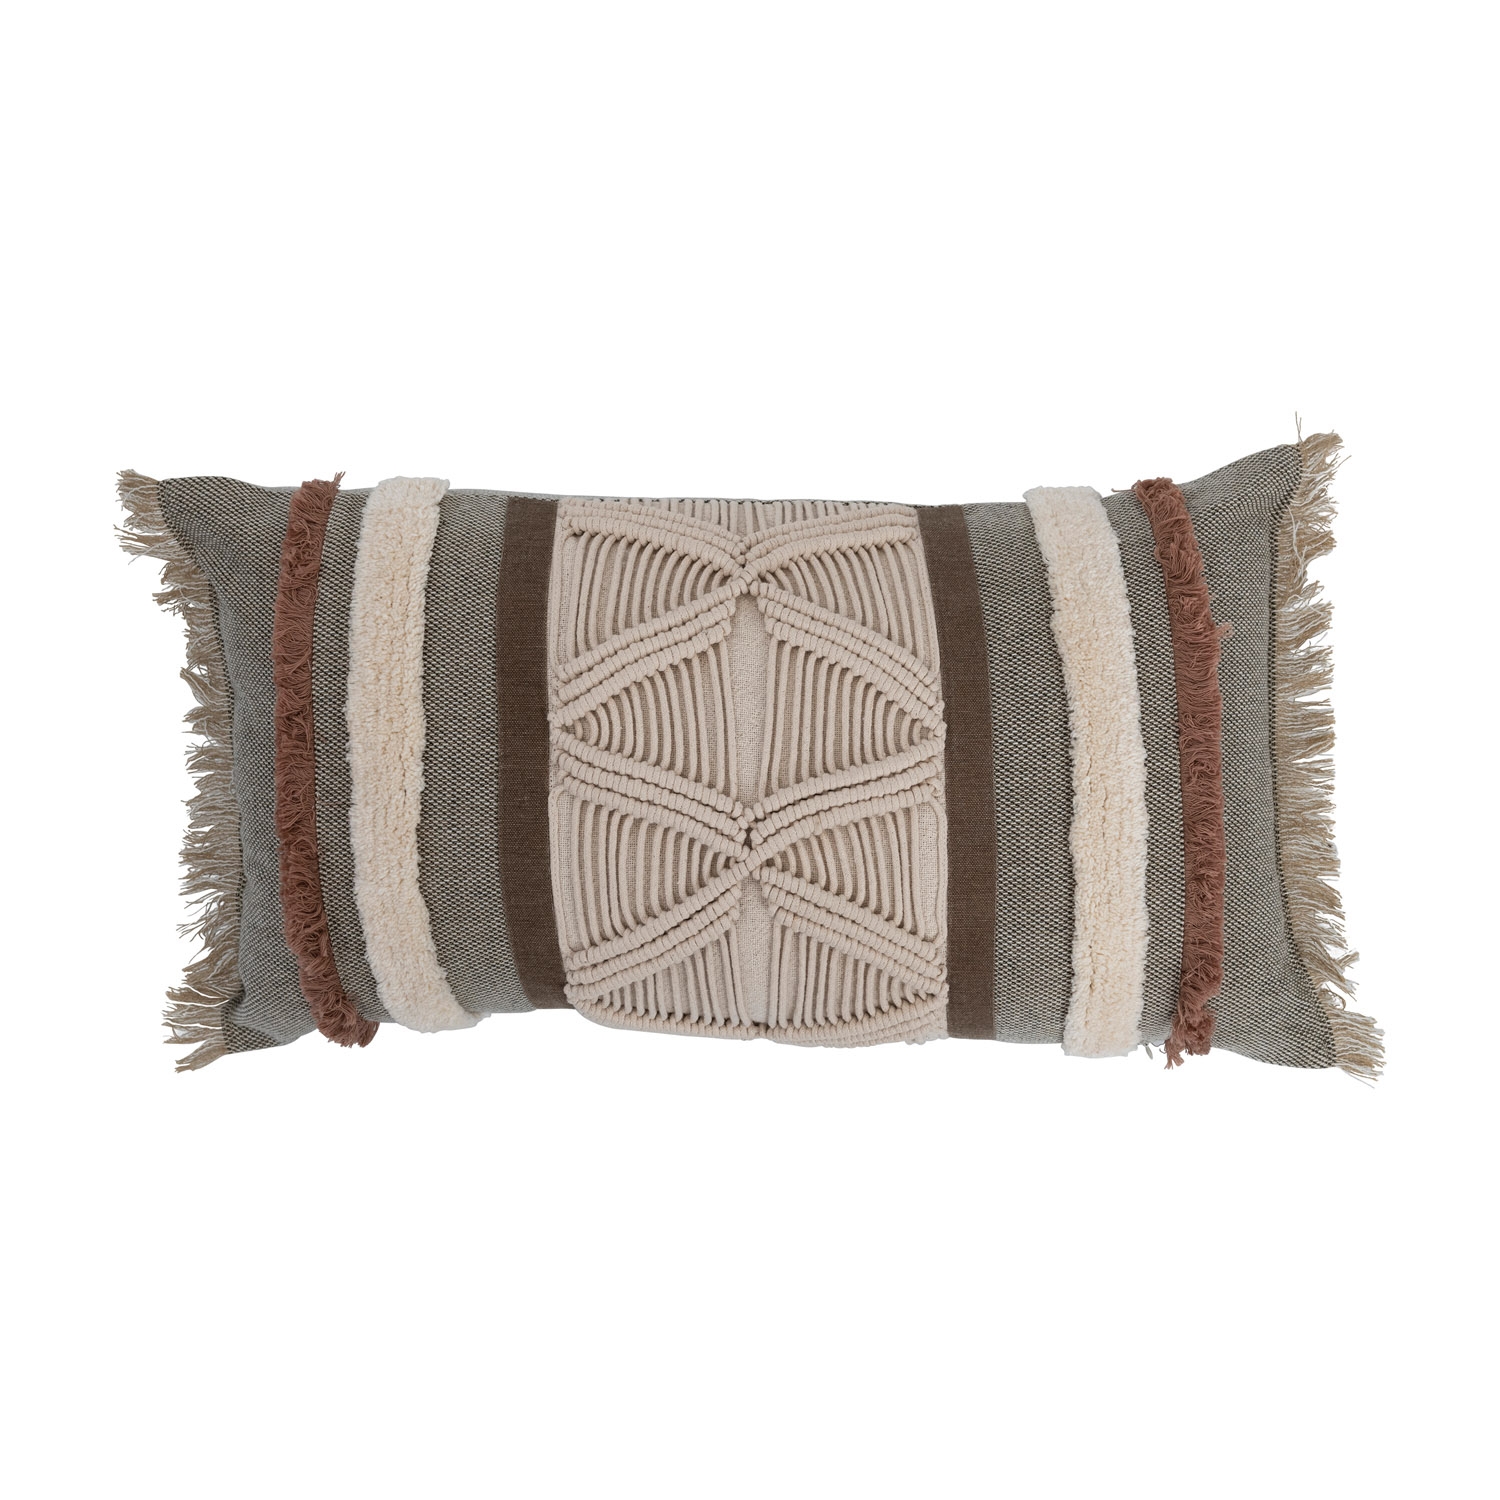 Cotton Tufted Lumbar Pillow with Applique, Macramé and Fringe - Image 0